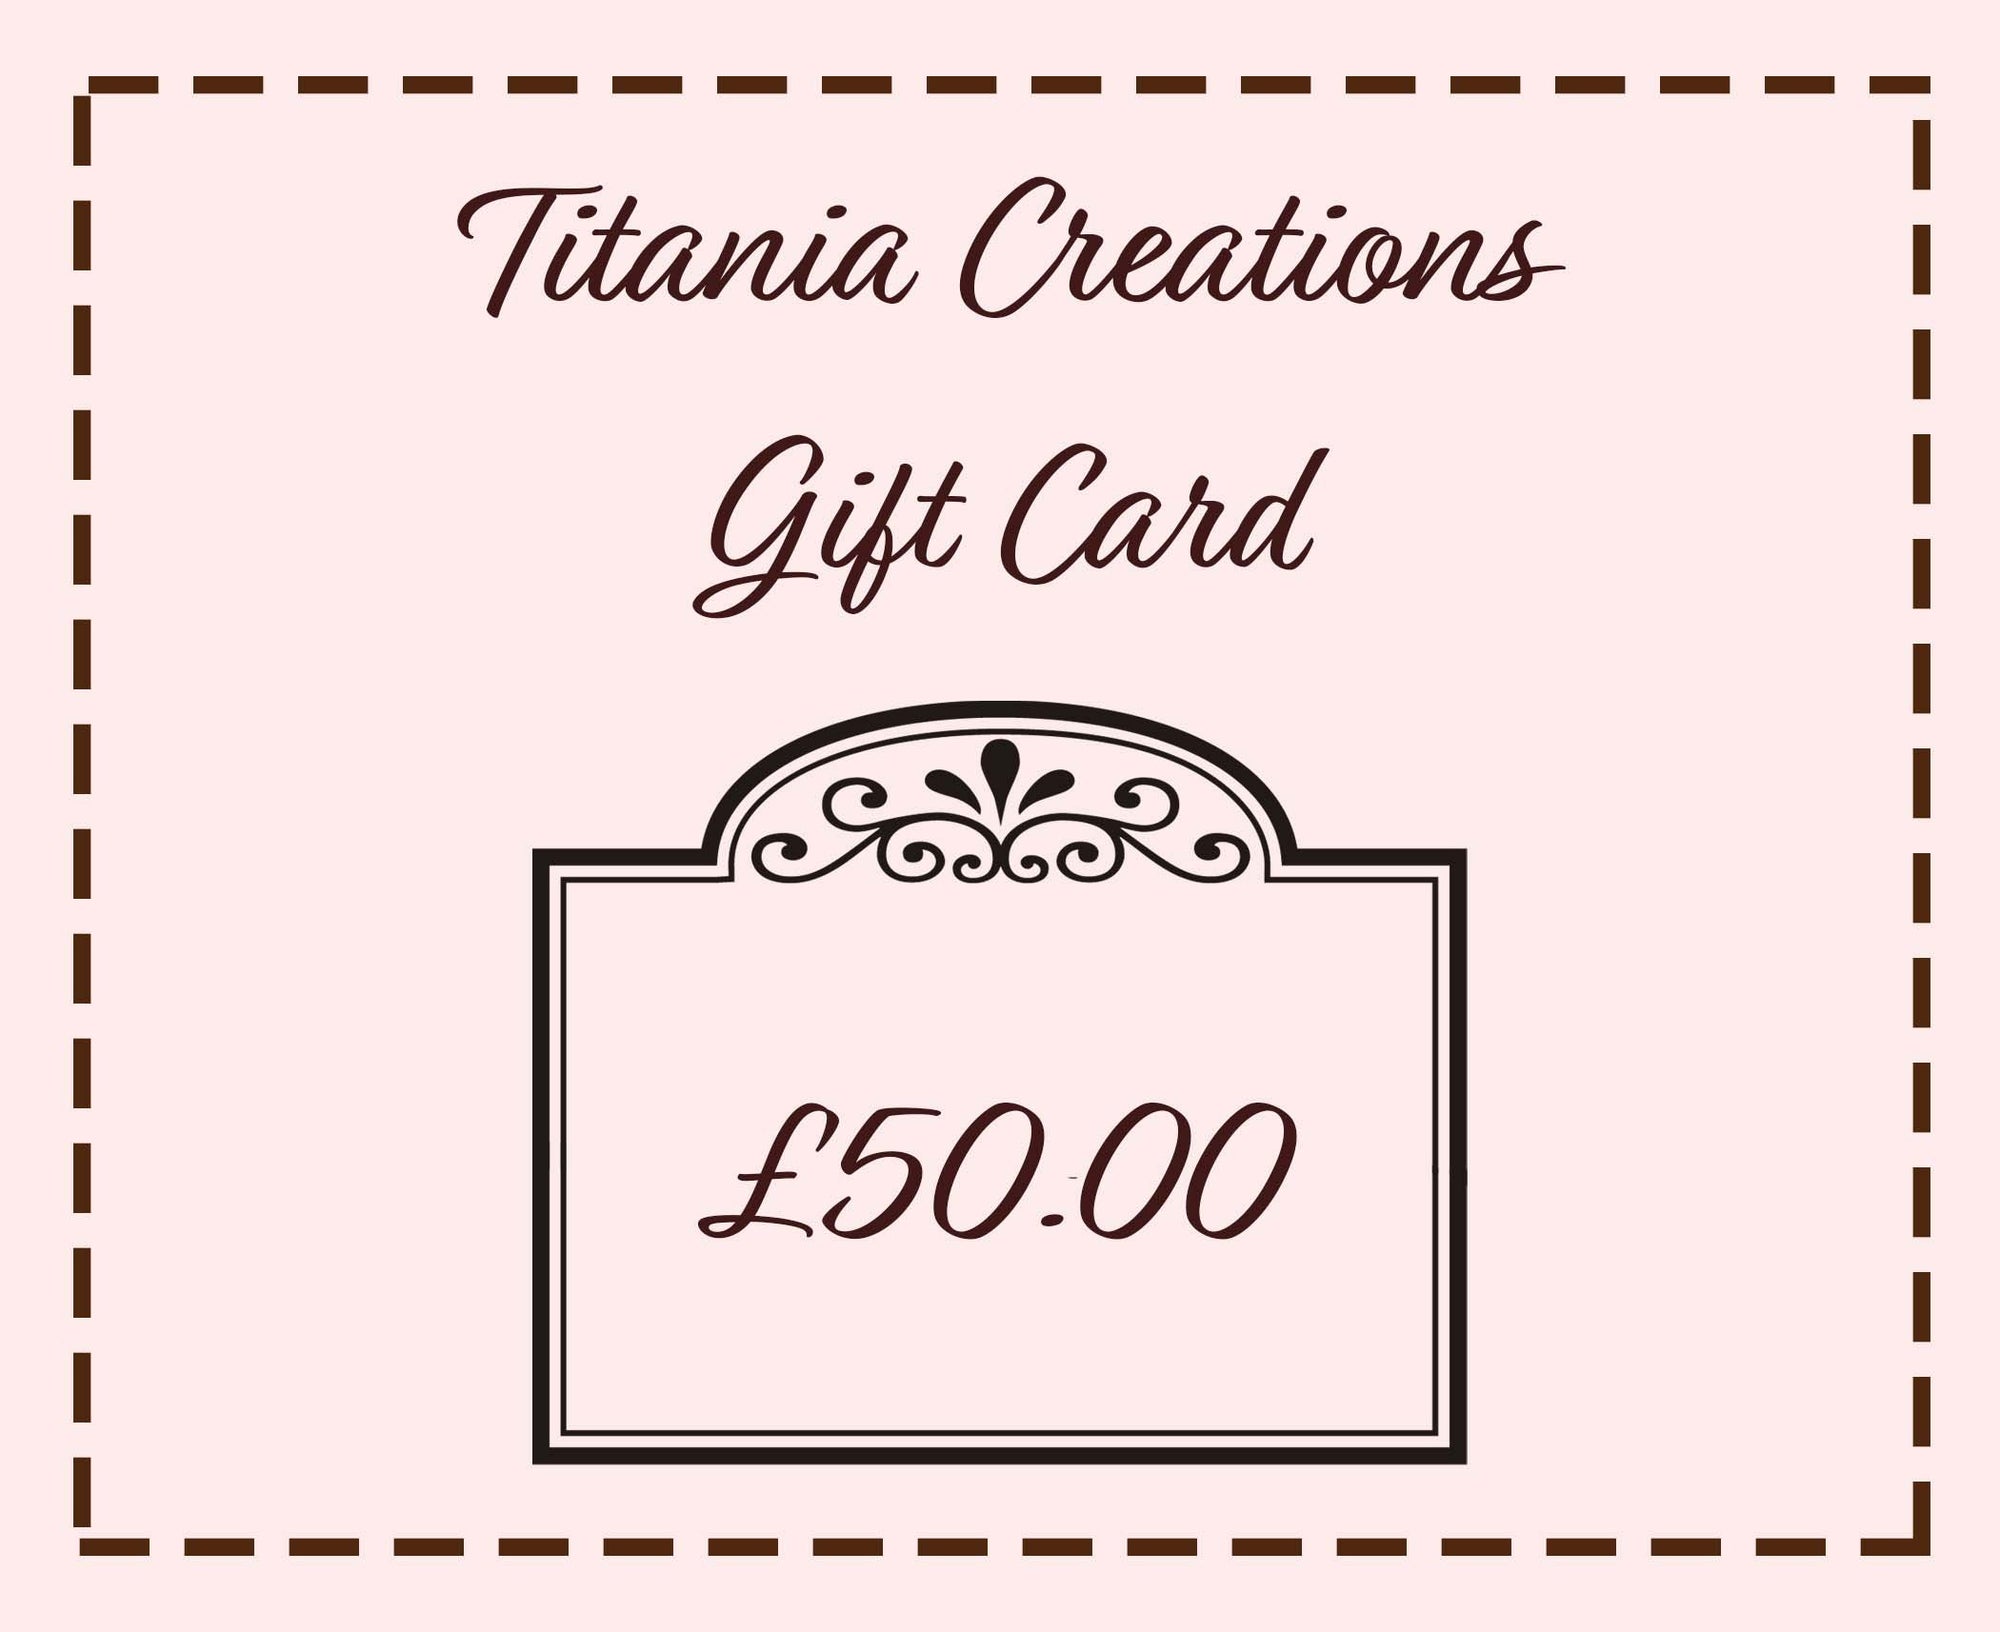 Gift Cards £50.00 Card